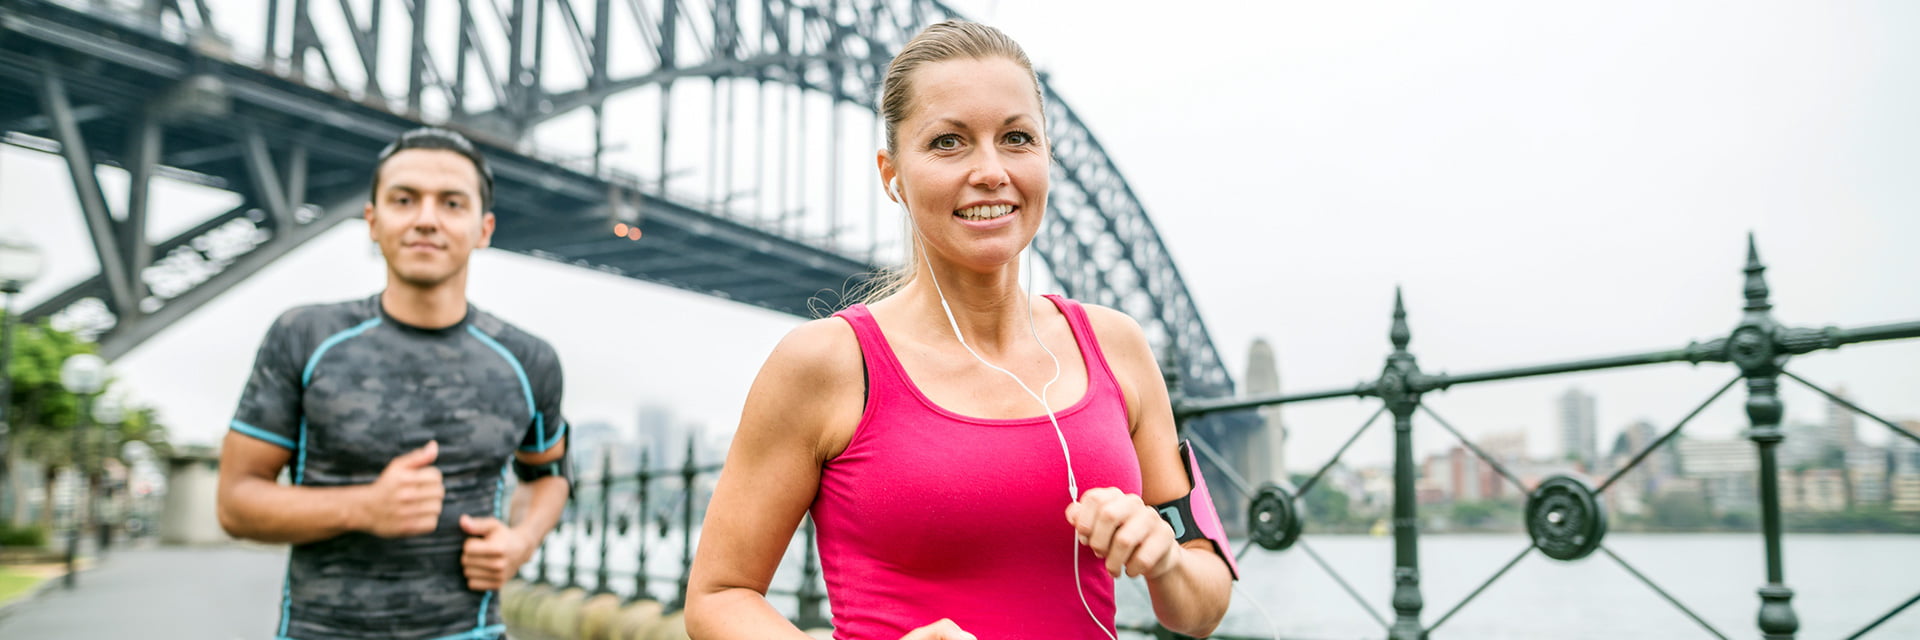 Woman wearing a pink top running with a man in a grey top near the Sydney Harbour Bridge